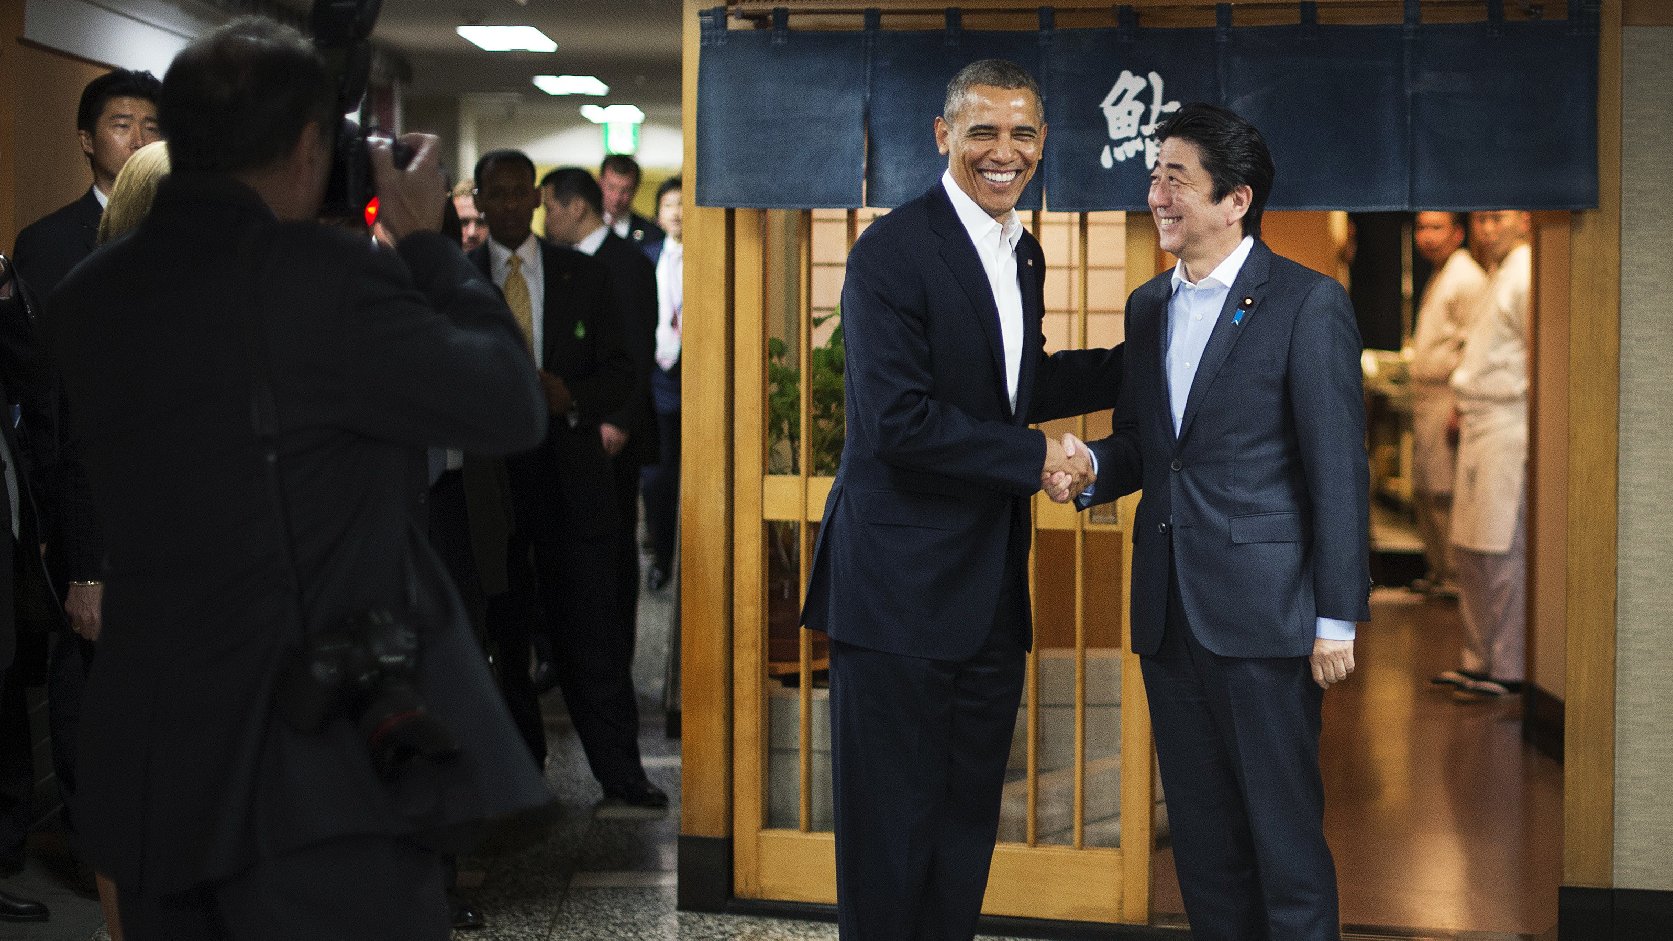 President Obama shakes hands with Japanese Prime Minister Shinzo Abe before a private dinner at Sukiyabashi Jiro restaurant in Tokyo on Wednesday. At Sukiyabashi Jiro, people pay a minimum $300 for 20 pieces of sushi chosen by the patron, Jiro Ono. Photo: Jim Watson/AFP/Getty Images